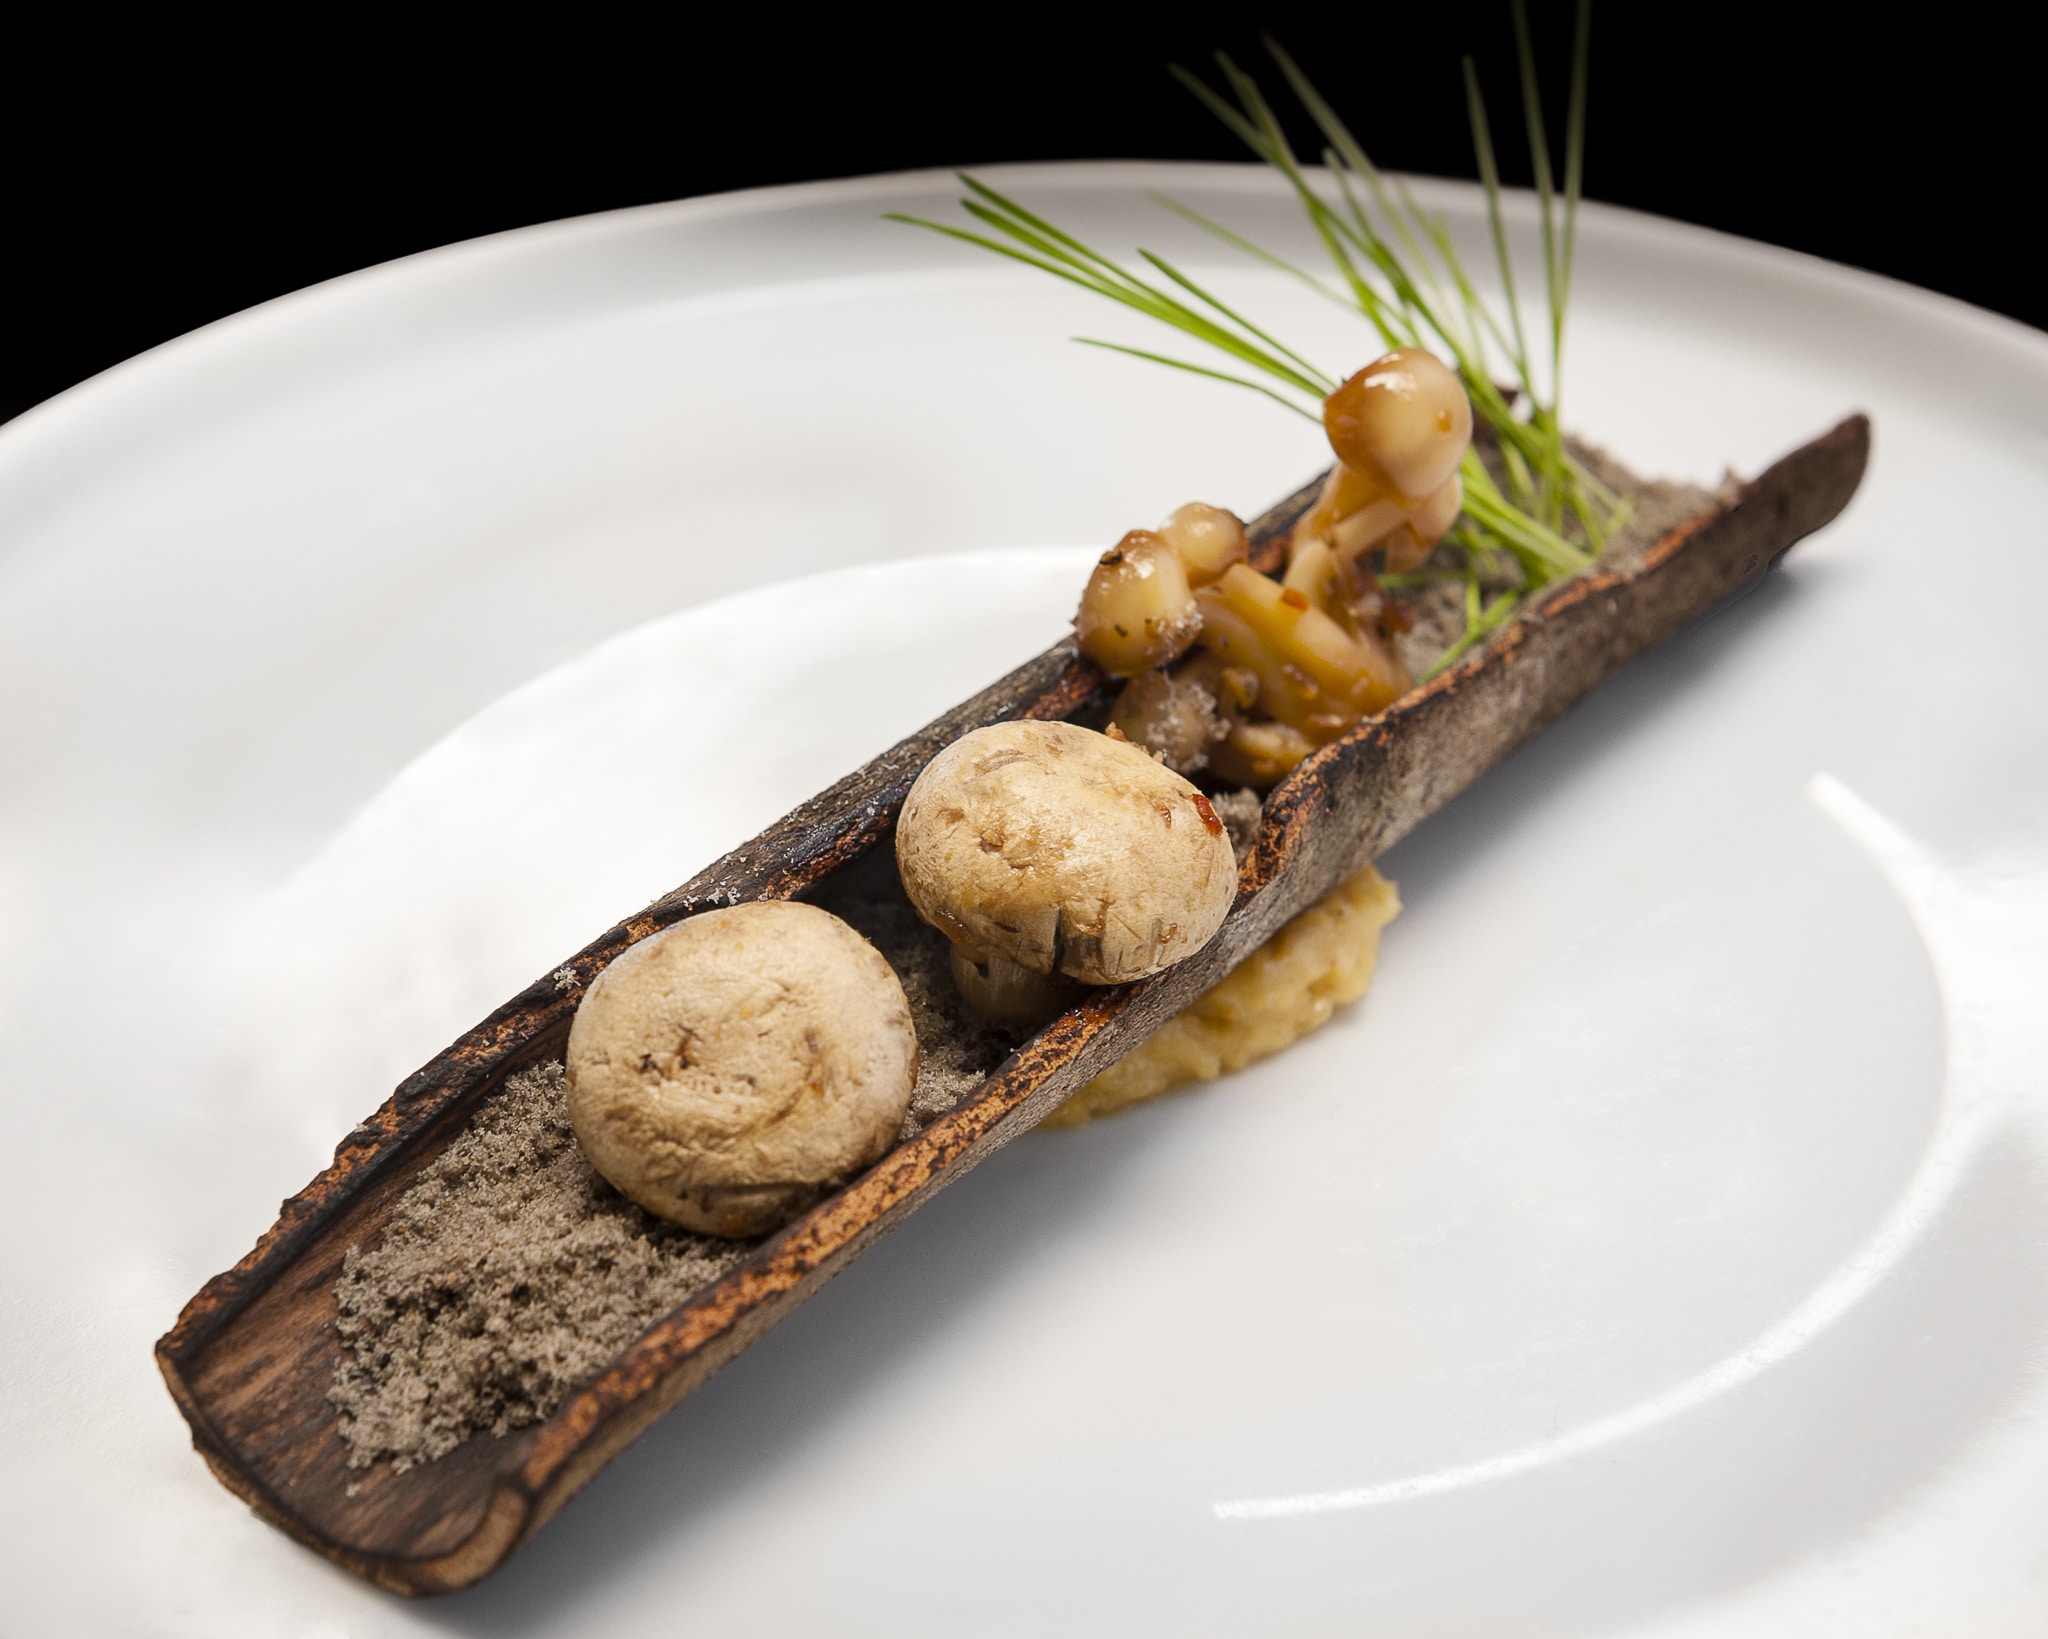 A nature-inspired dish plated with mushroom and edible dirt. 